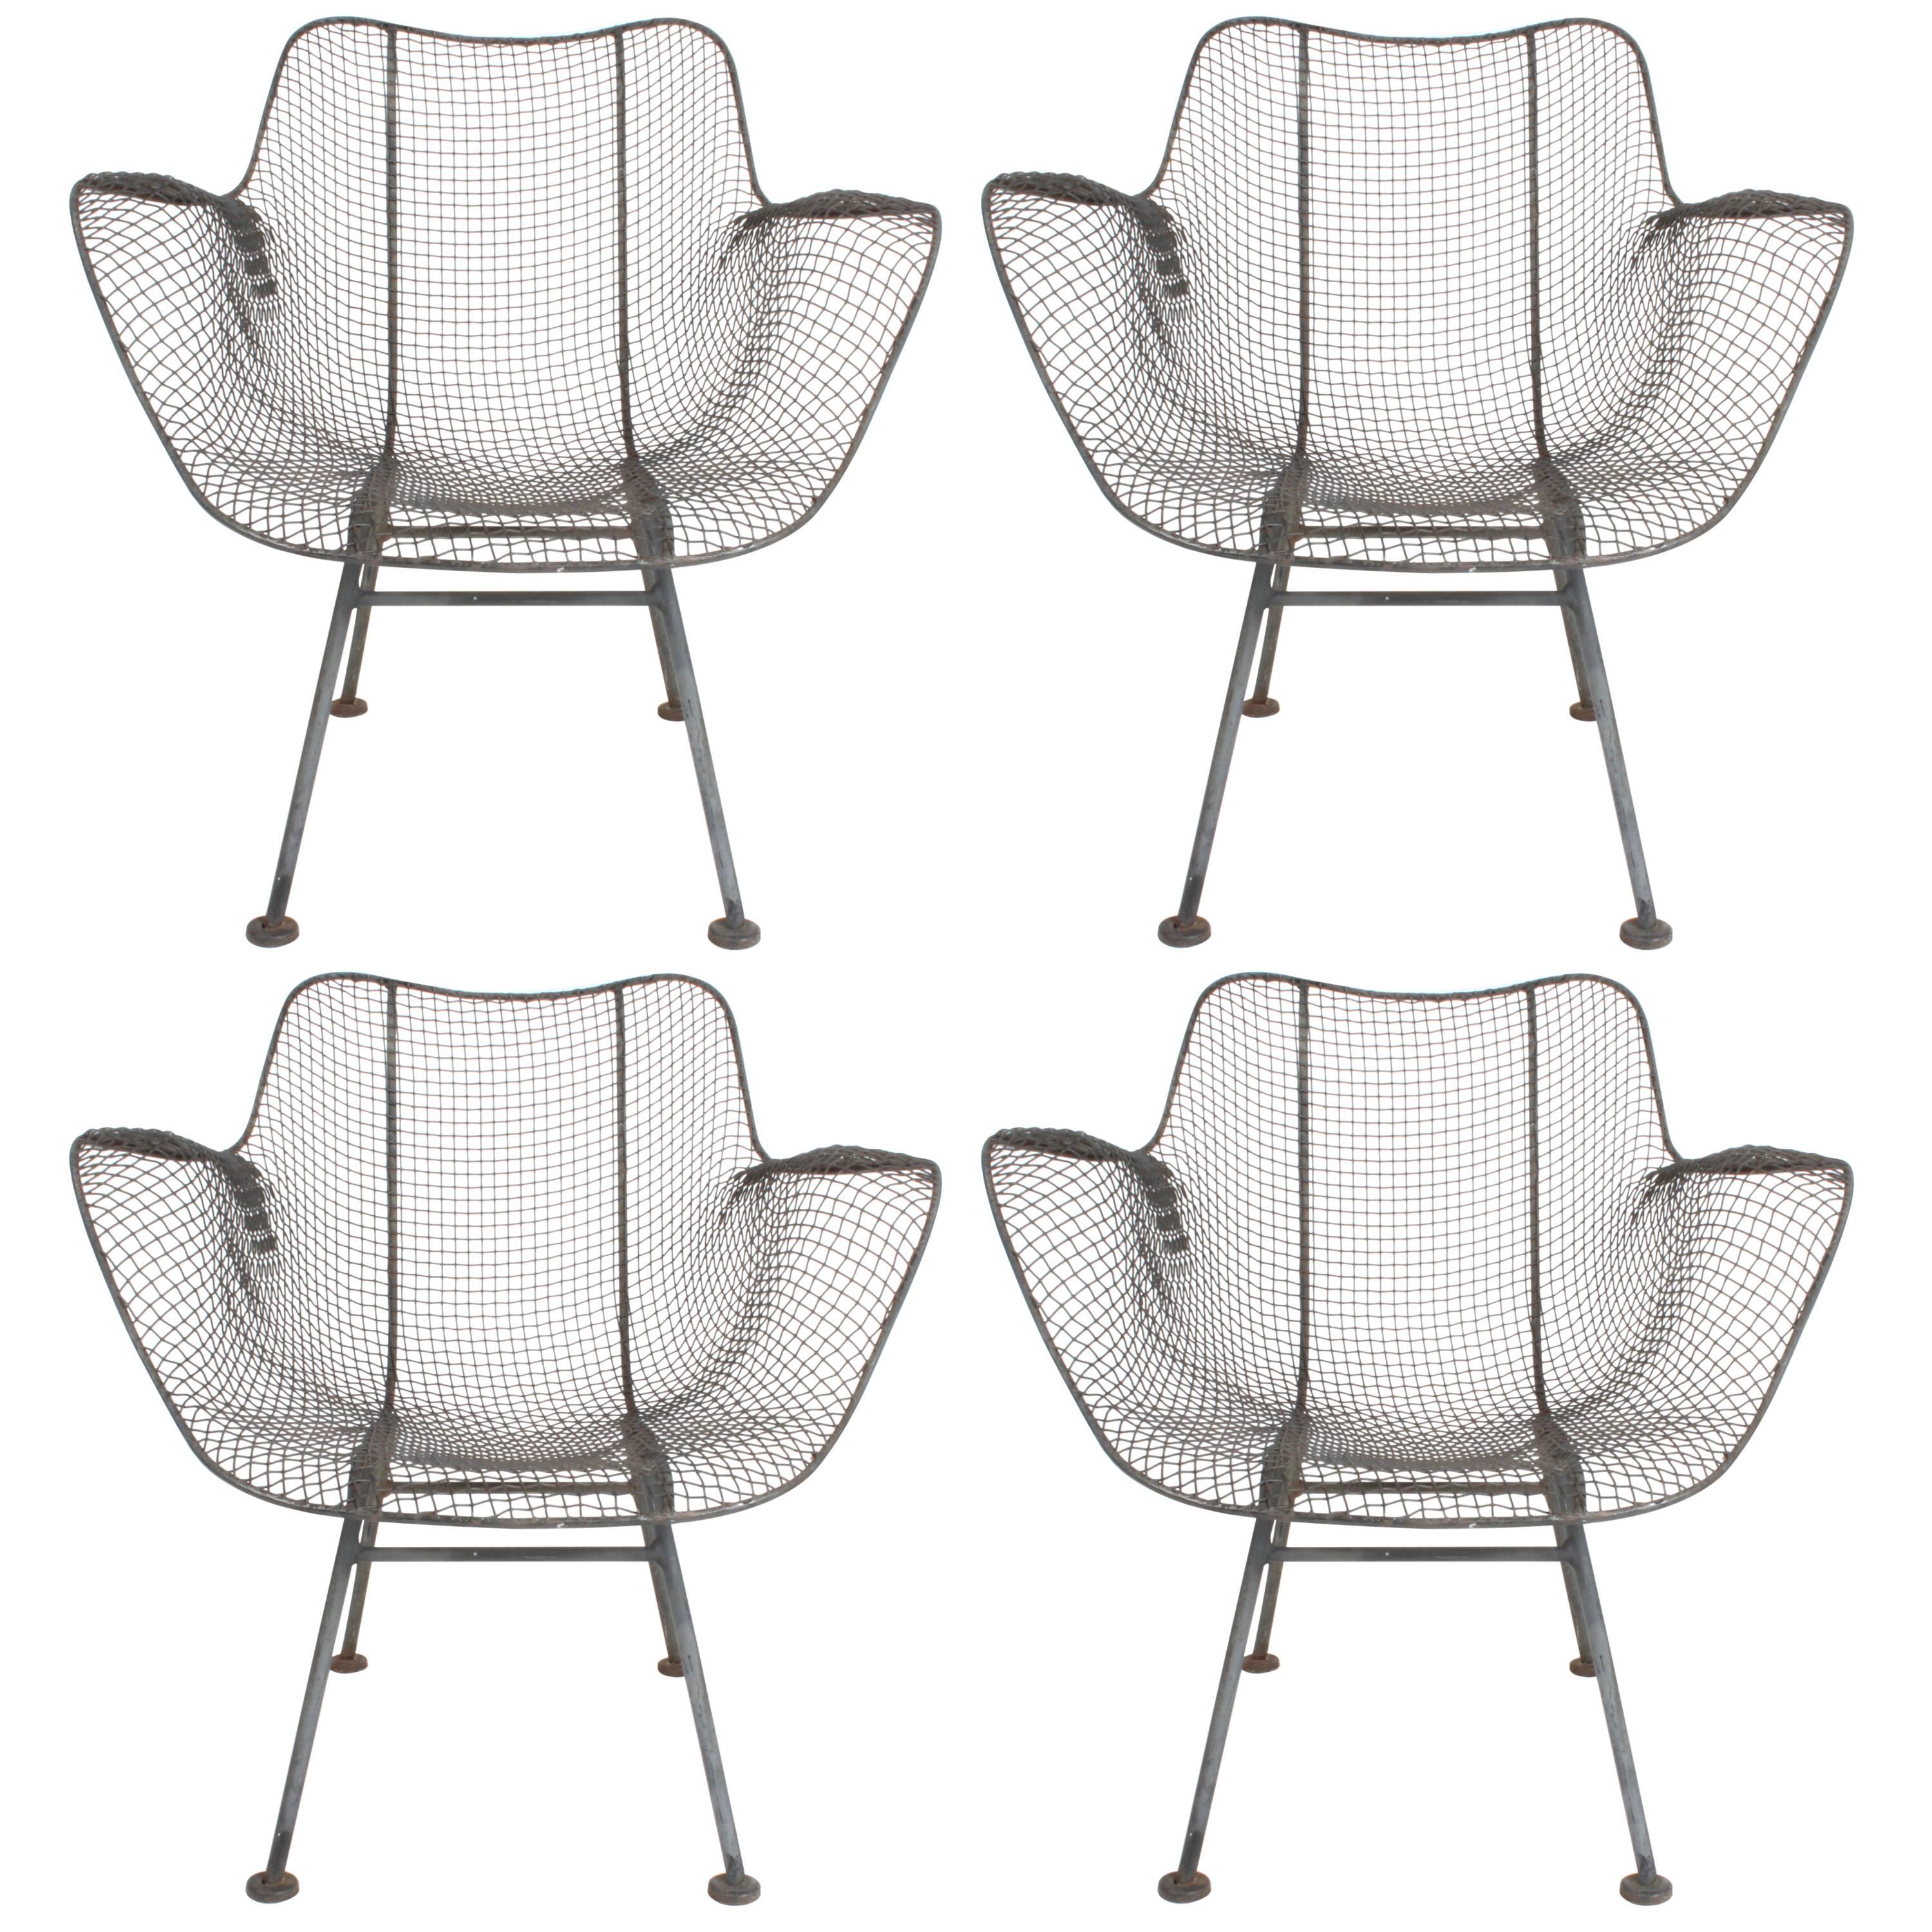 Russell Woodard Low Lounge Patio Chairs Sculptura Line